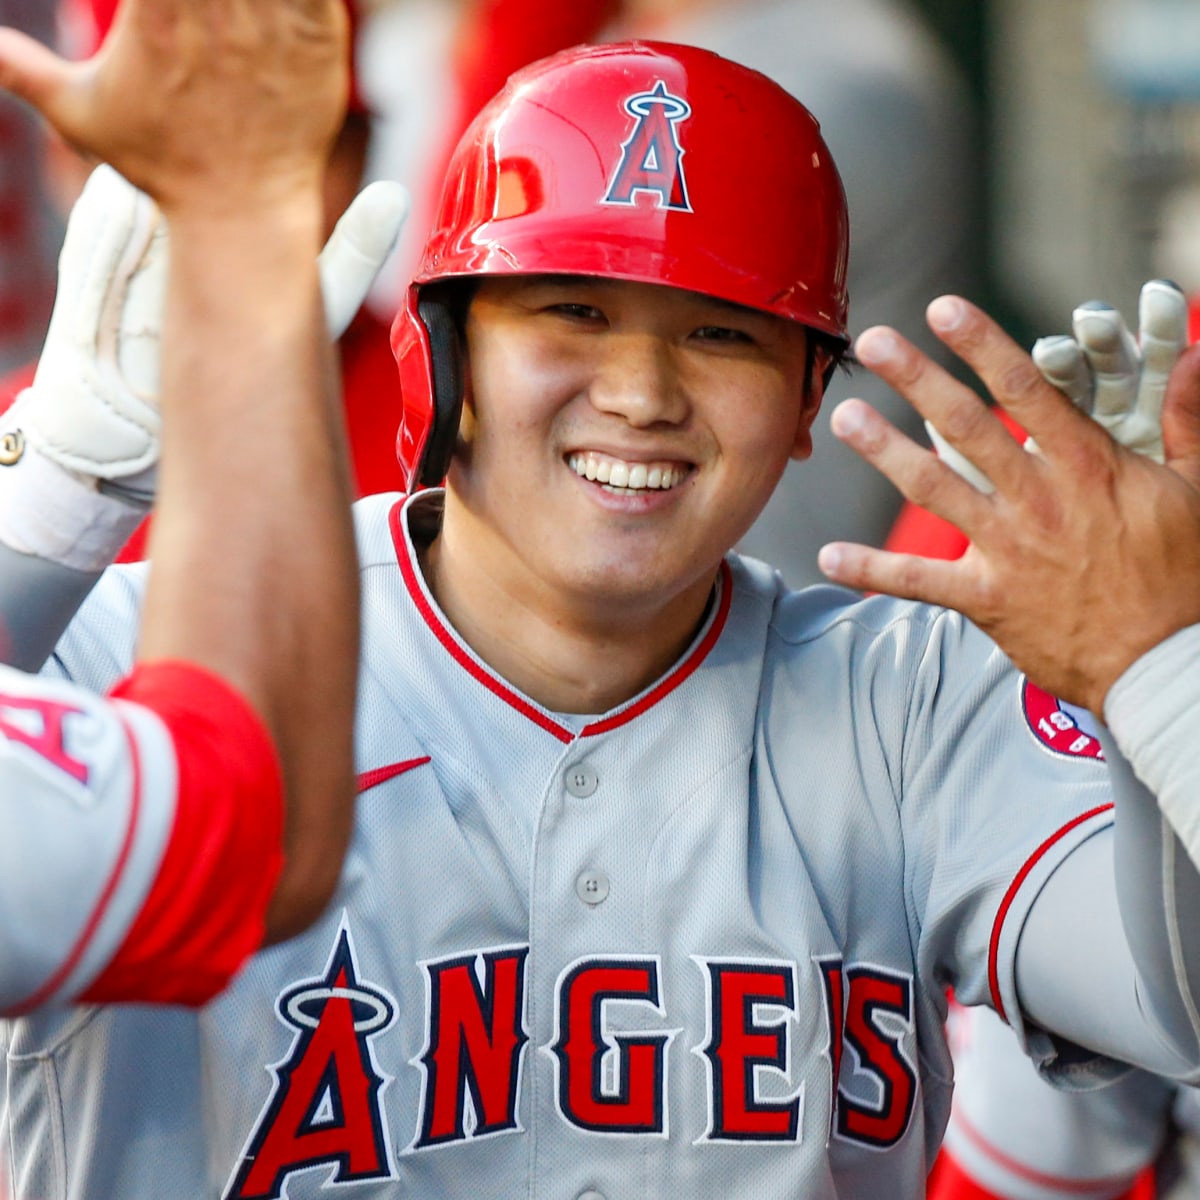 Shohei Ohtani to start on mound, bat leadoff in All-Star Game